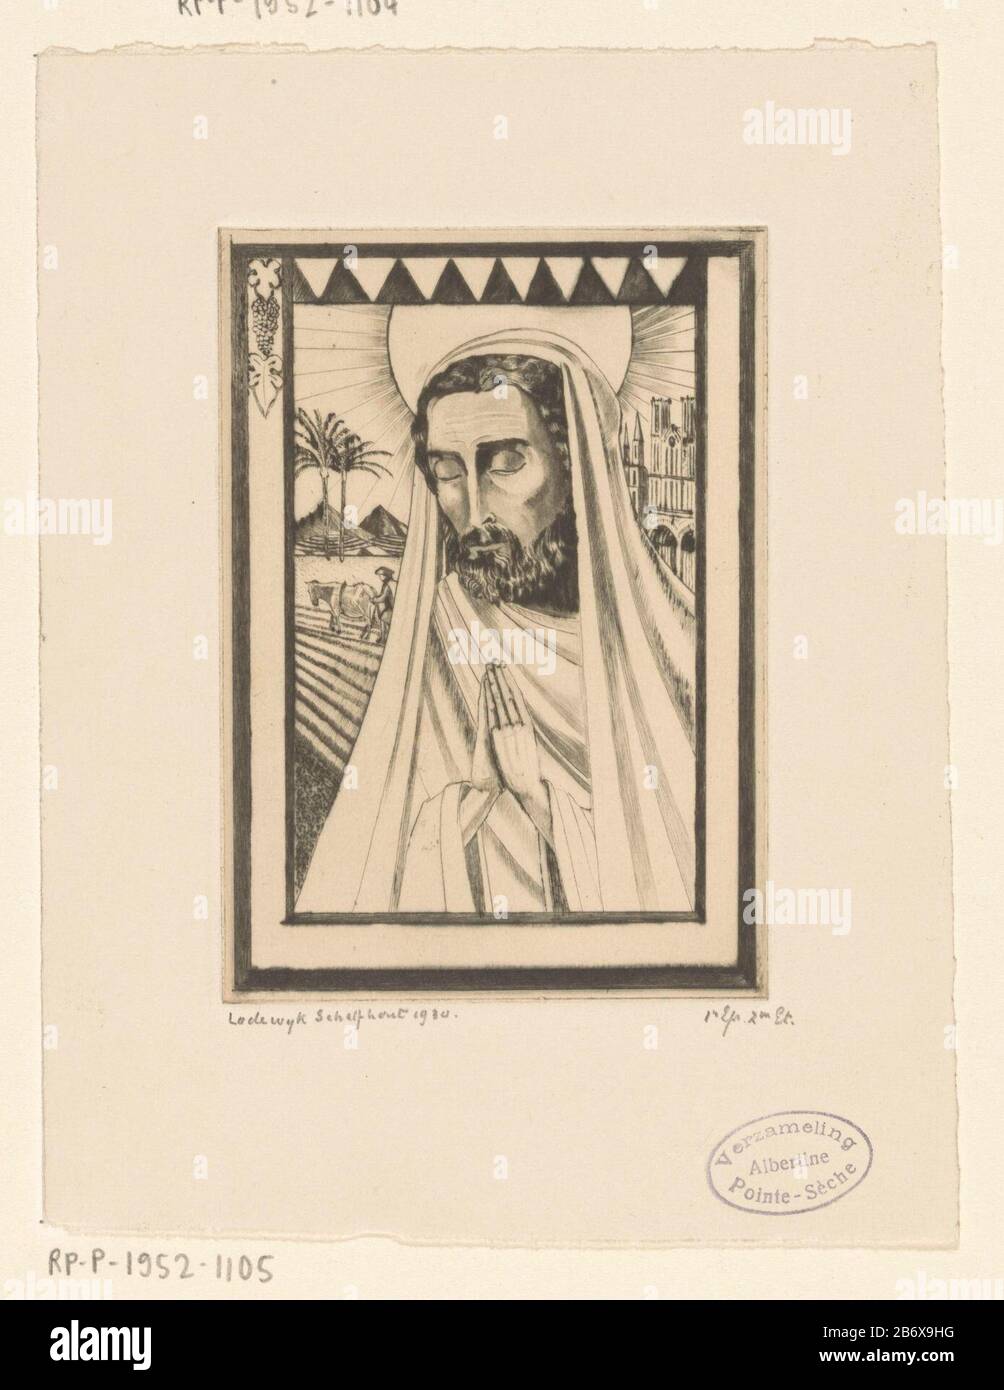 Jozef St Joseph (originele titel) Joseph, with folded hands and closed eyes. In this second state of the picture is in the background a landscape with field, palm trees, mountains and churches toegevoegd. Manufacturer : printmaker Lodewijk Schelfhout (personally signed) printer: NV Roeloffzen & Hübner Dating: 1930 Physical features: drypoint on copper material: paper technique: drypoint dimensions: plate edge: h 120 mm × W 85 mm Subject: the foster-father of Christ, Joseph of Nazareth, husband of Mary; possible attributes: flowering rod or wall, lily, carpenter's toolsone person praying Stock Photo